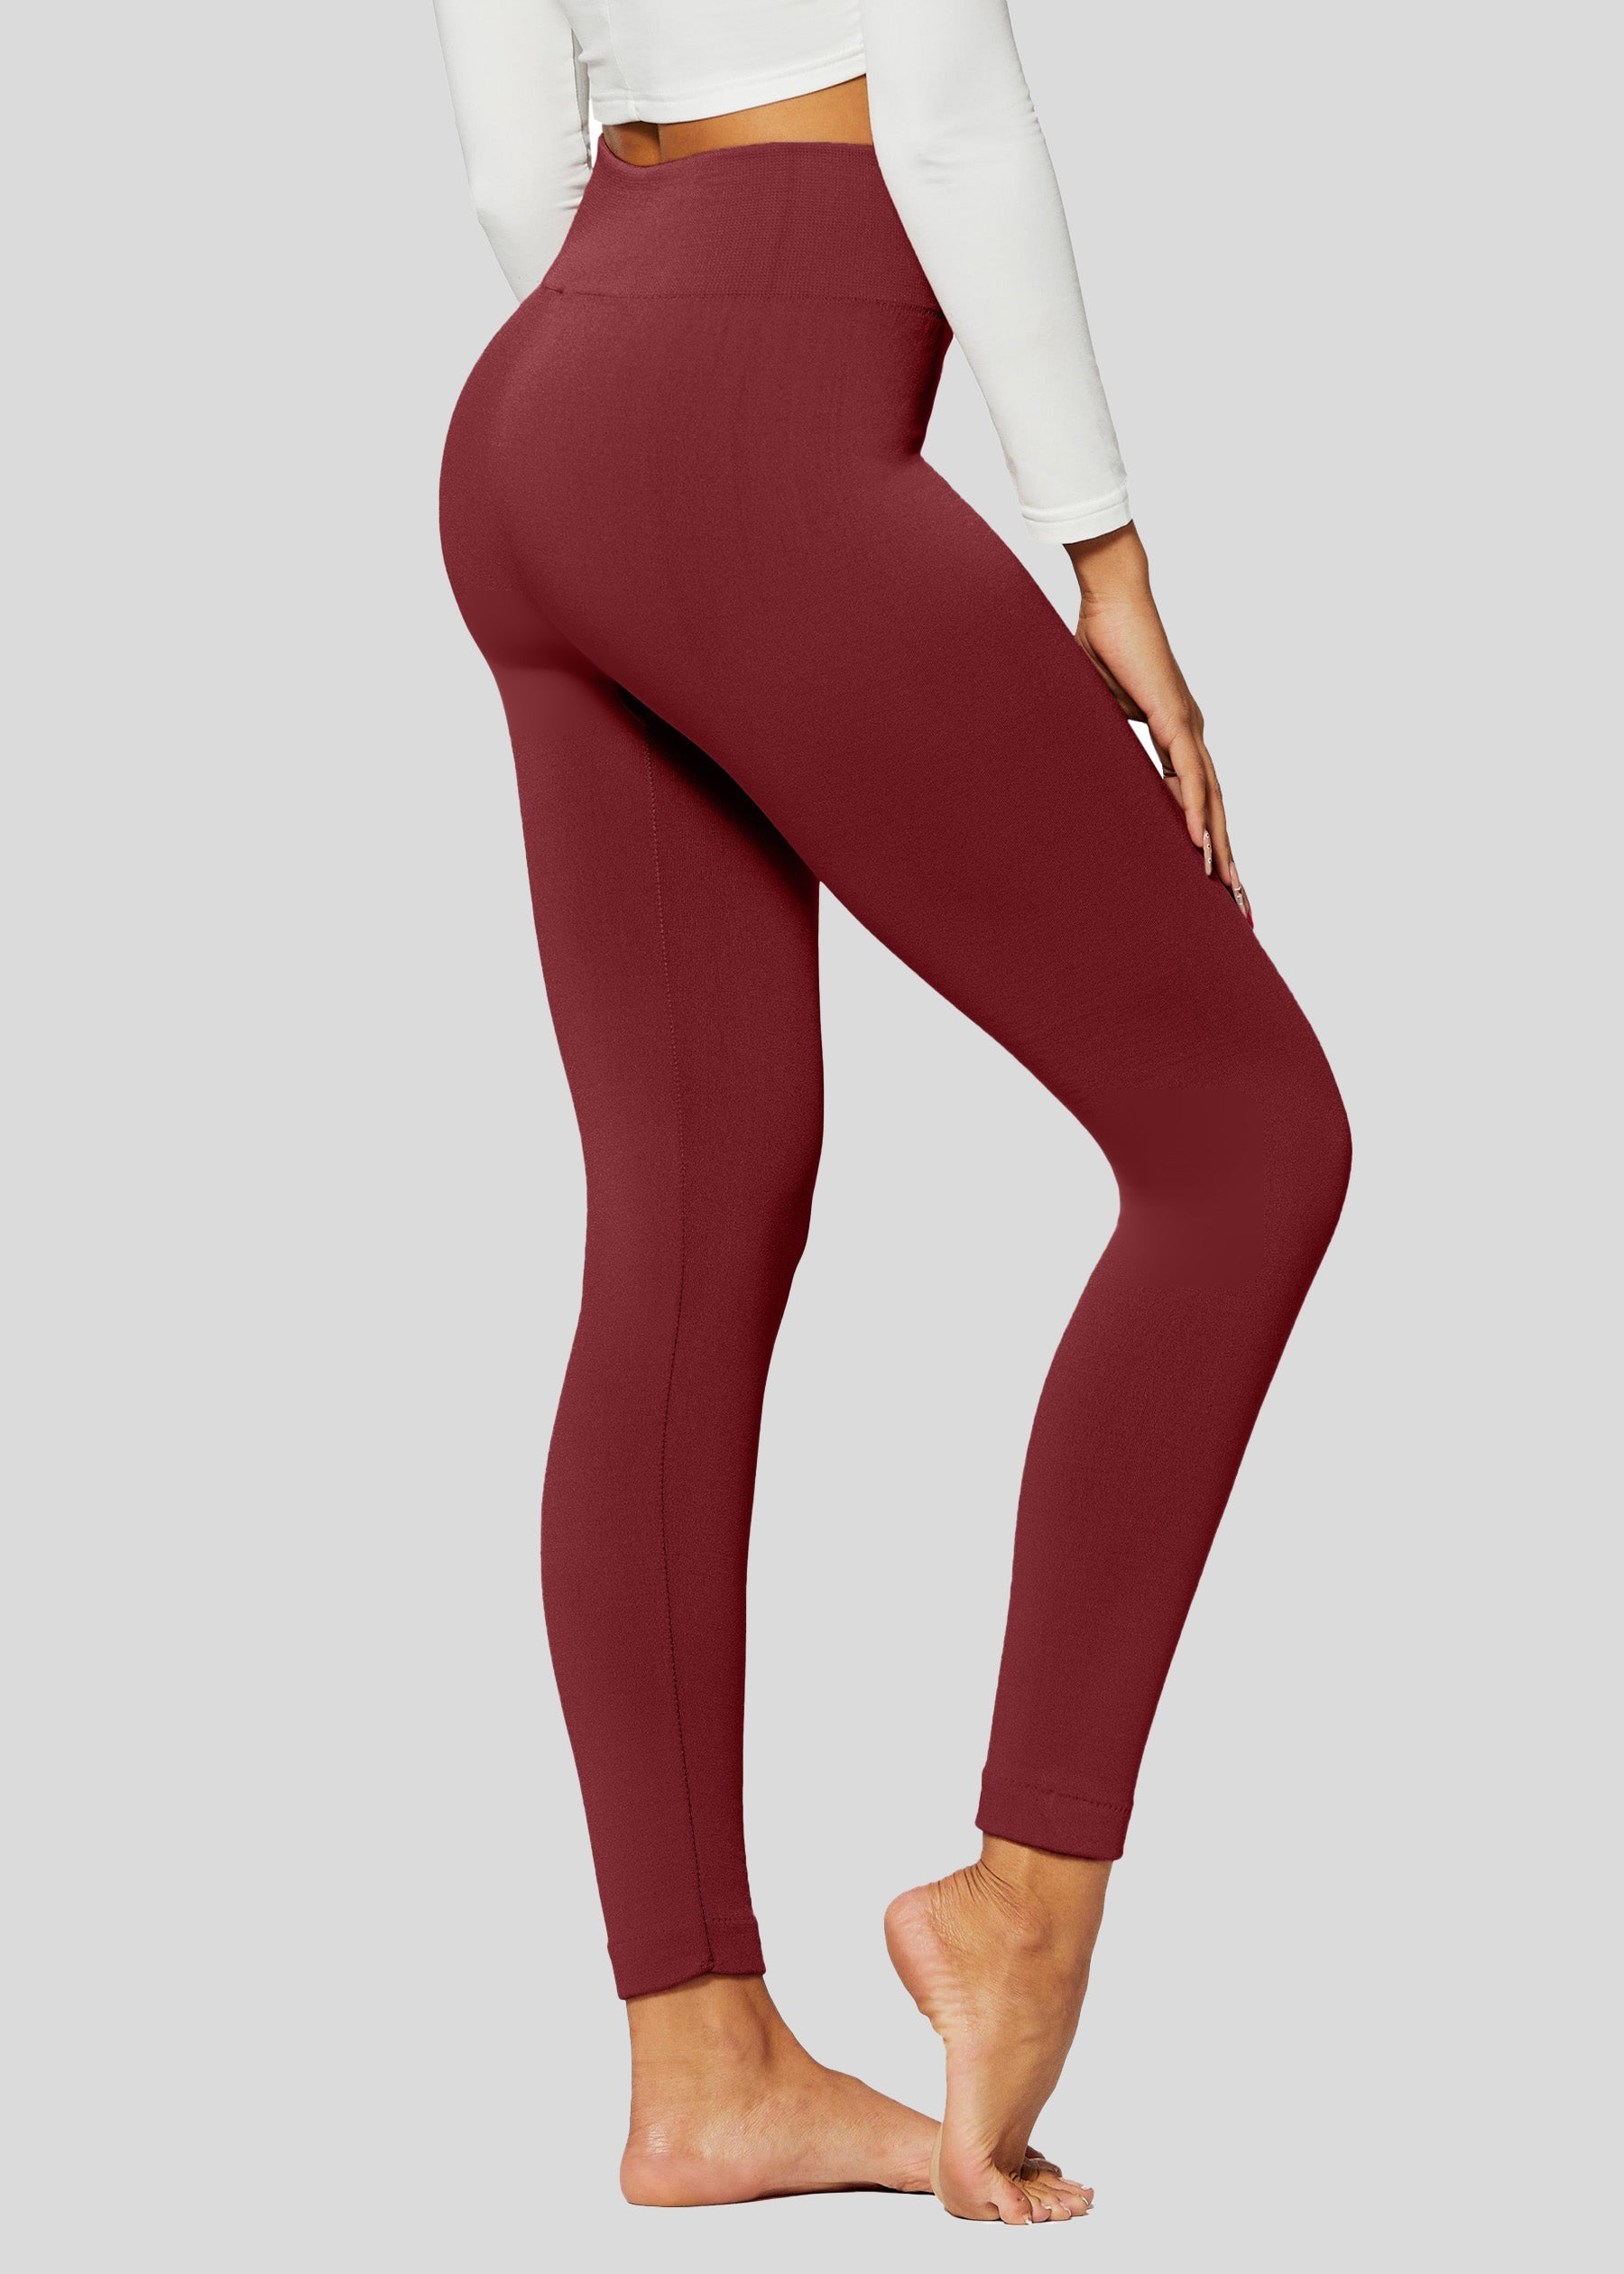 Women Fleece Lining Leggings Solid Color Tights Full Length High Waist  Tummy Control Pants For